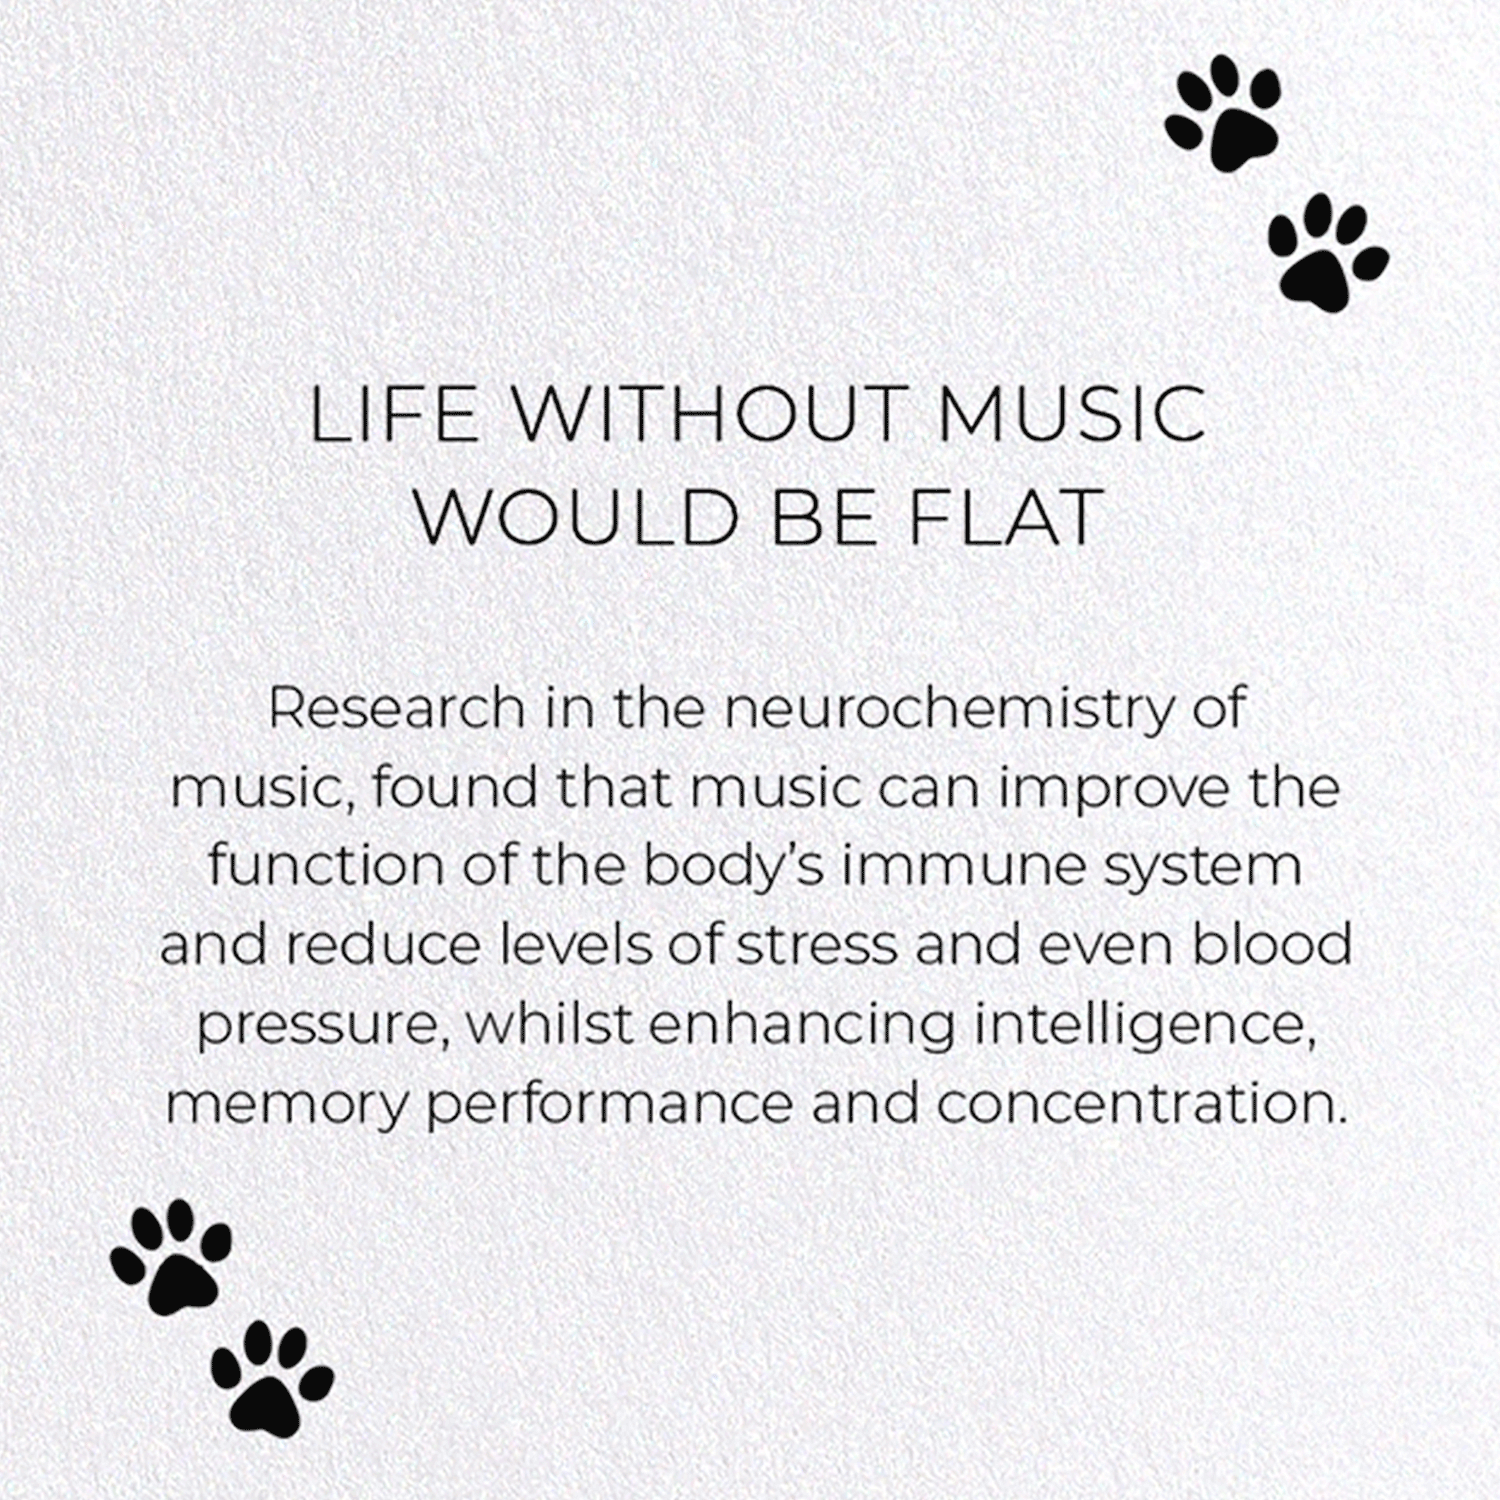 LIFE WITHOUT MUSIC WOULD BE FLAT: Funny Animal Greeting Card